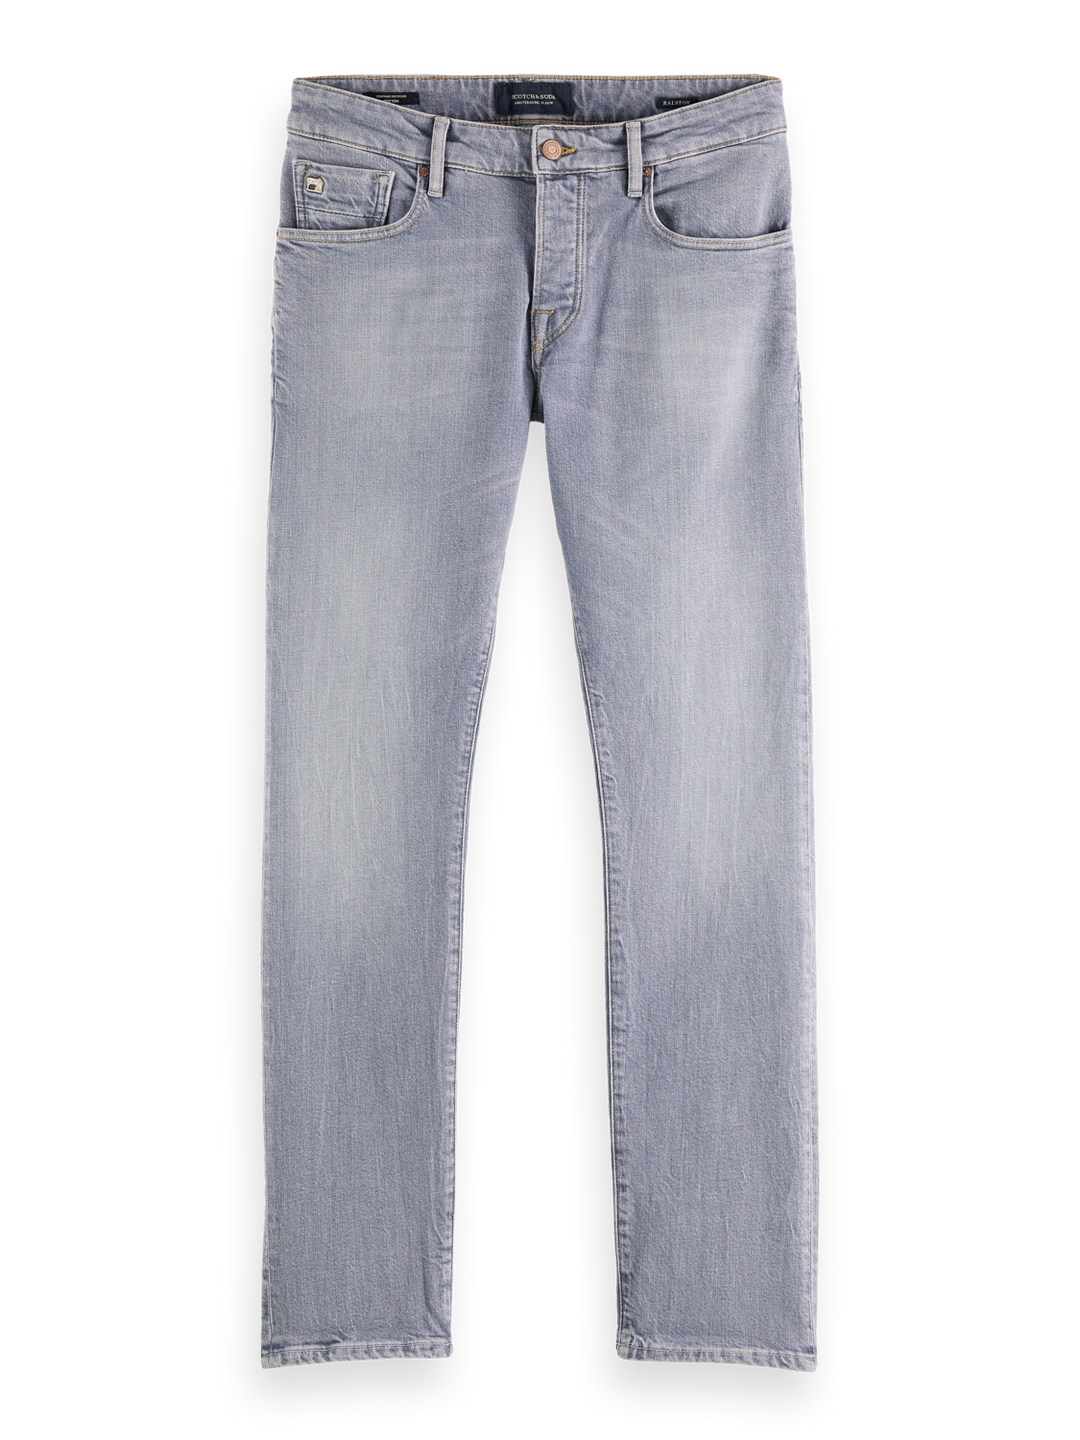 Ralston Pop of Smoke Regular Slim Fit Cotton Blend Jeans | Buster McGee